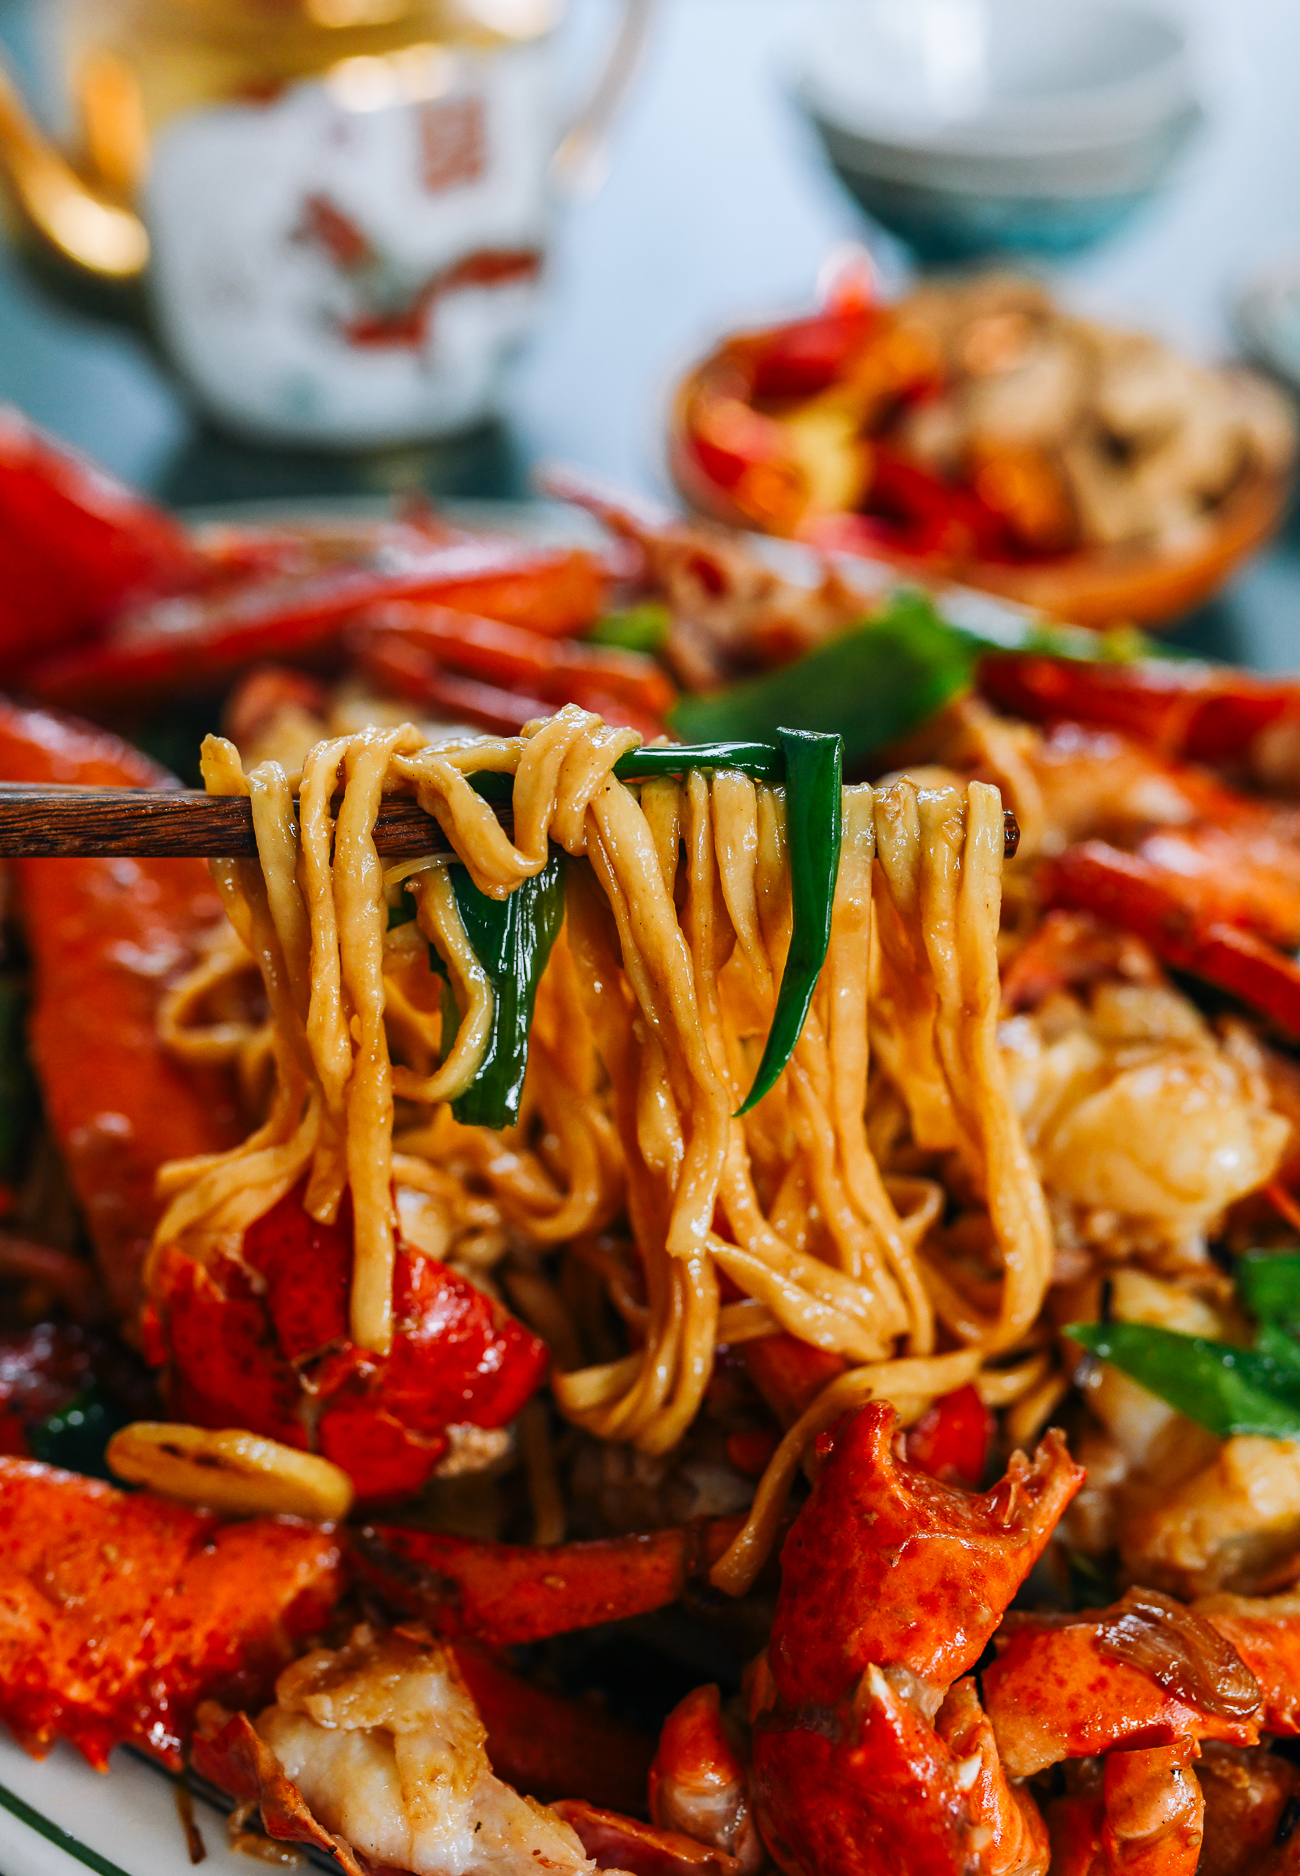 Lobster Yee Mein - picking up noodles with chopsticks